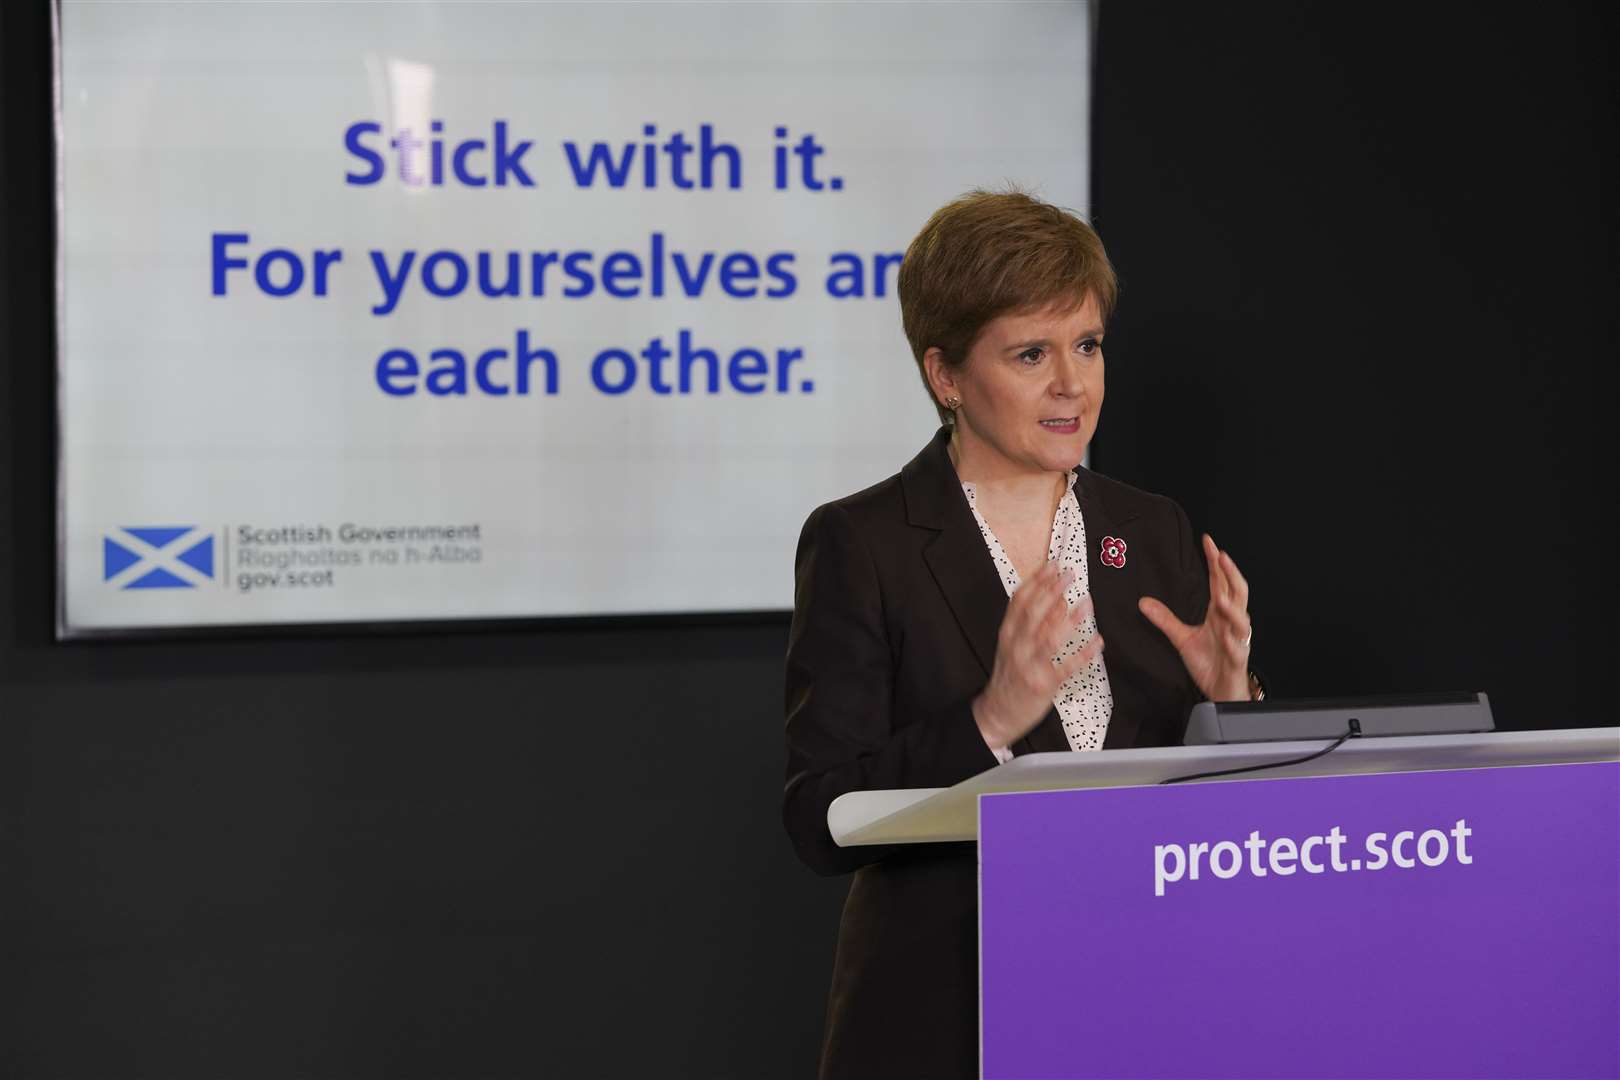 Nicola Sturgeon said that while there are no grounds for complacency there have been some encouraging signs.